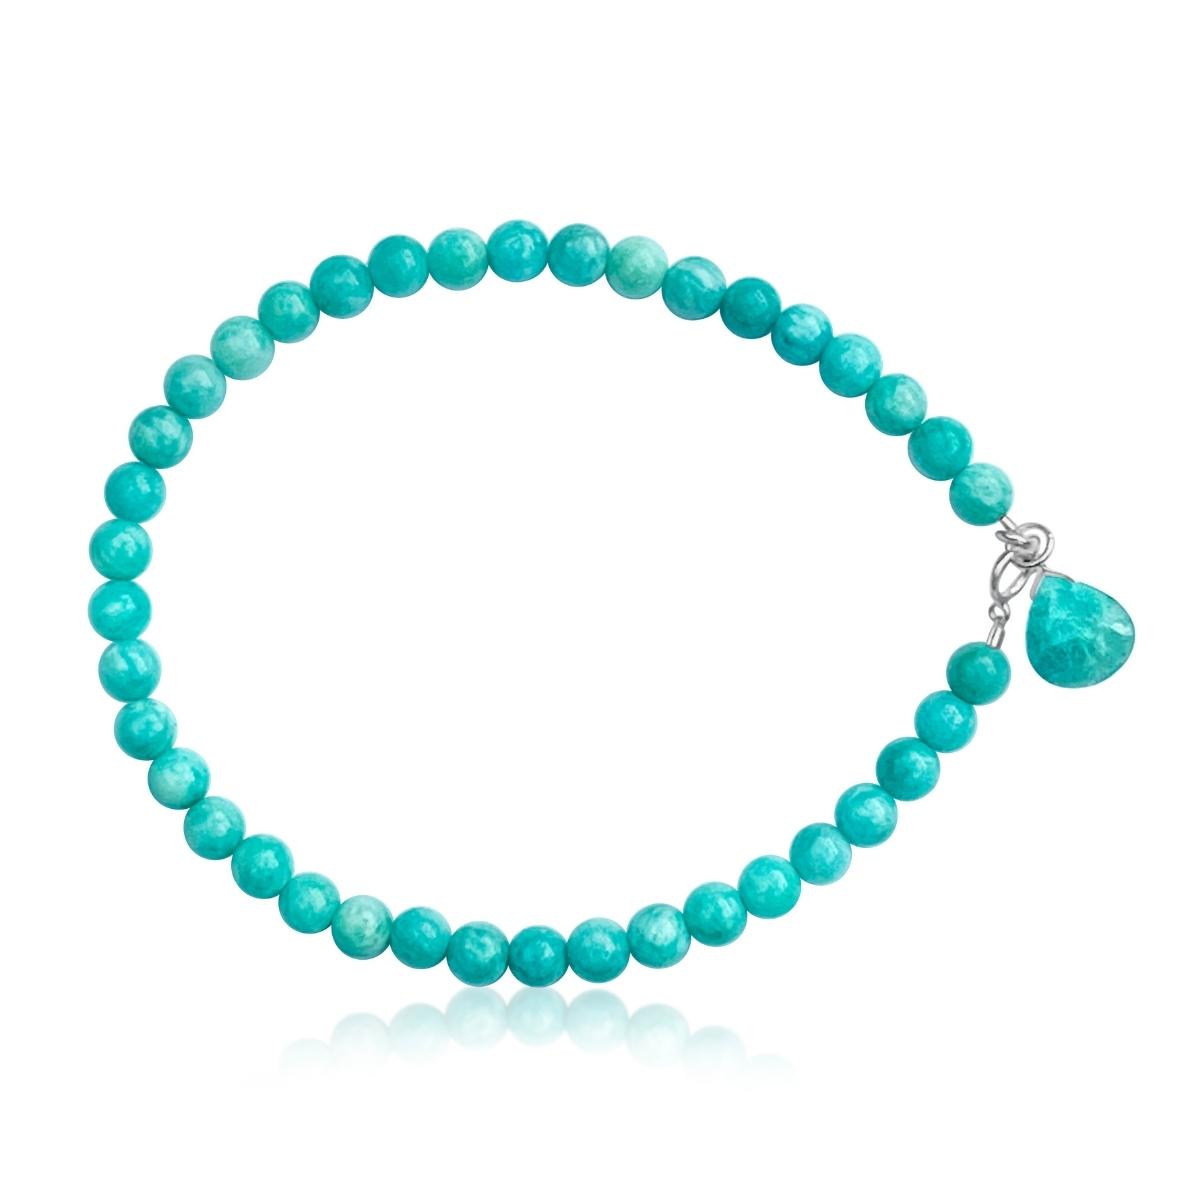 Freedom and Courage - Amazonite Anklet  Called the stone of courage and the stone of truth, Amazonite empowers one to search the self and discover one’s own truths and integrity, 